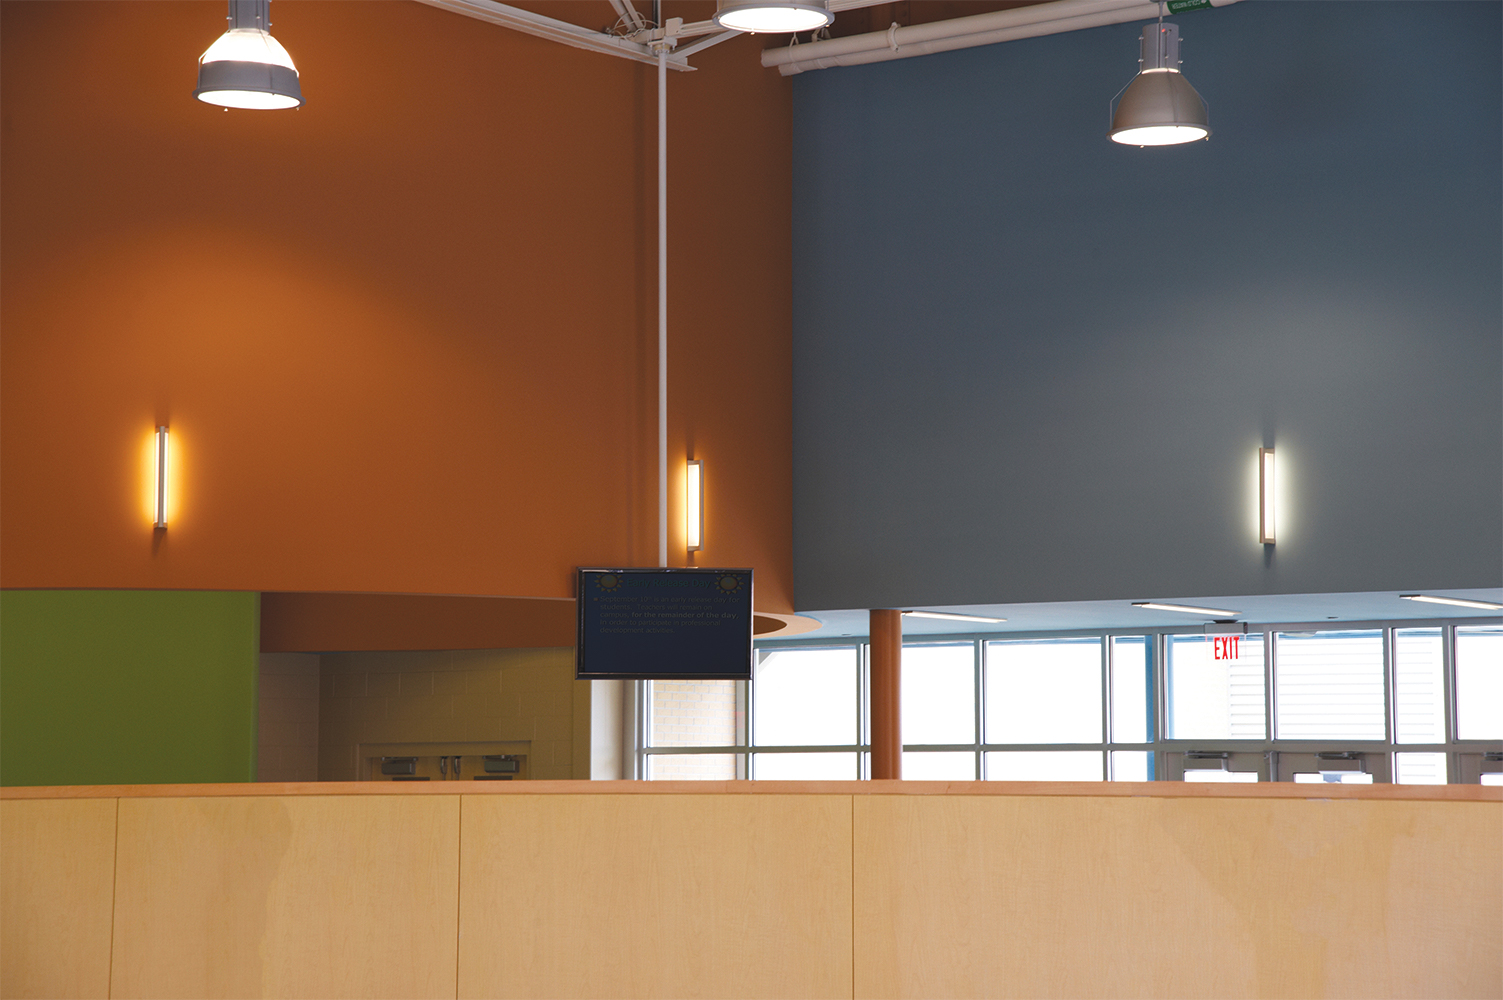 Ether wall-mounted luminaires along colorful classroom walls for a pleasing education lighting design.